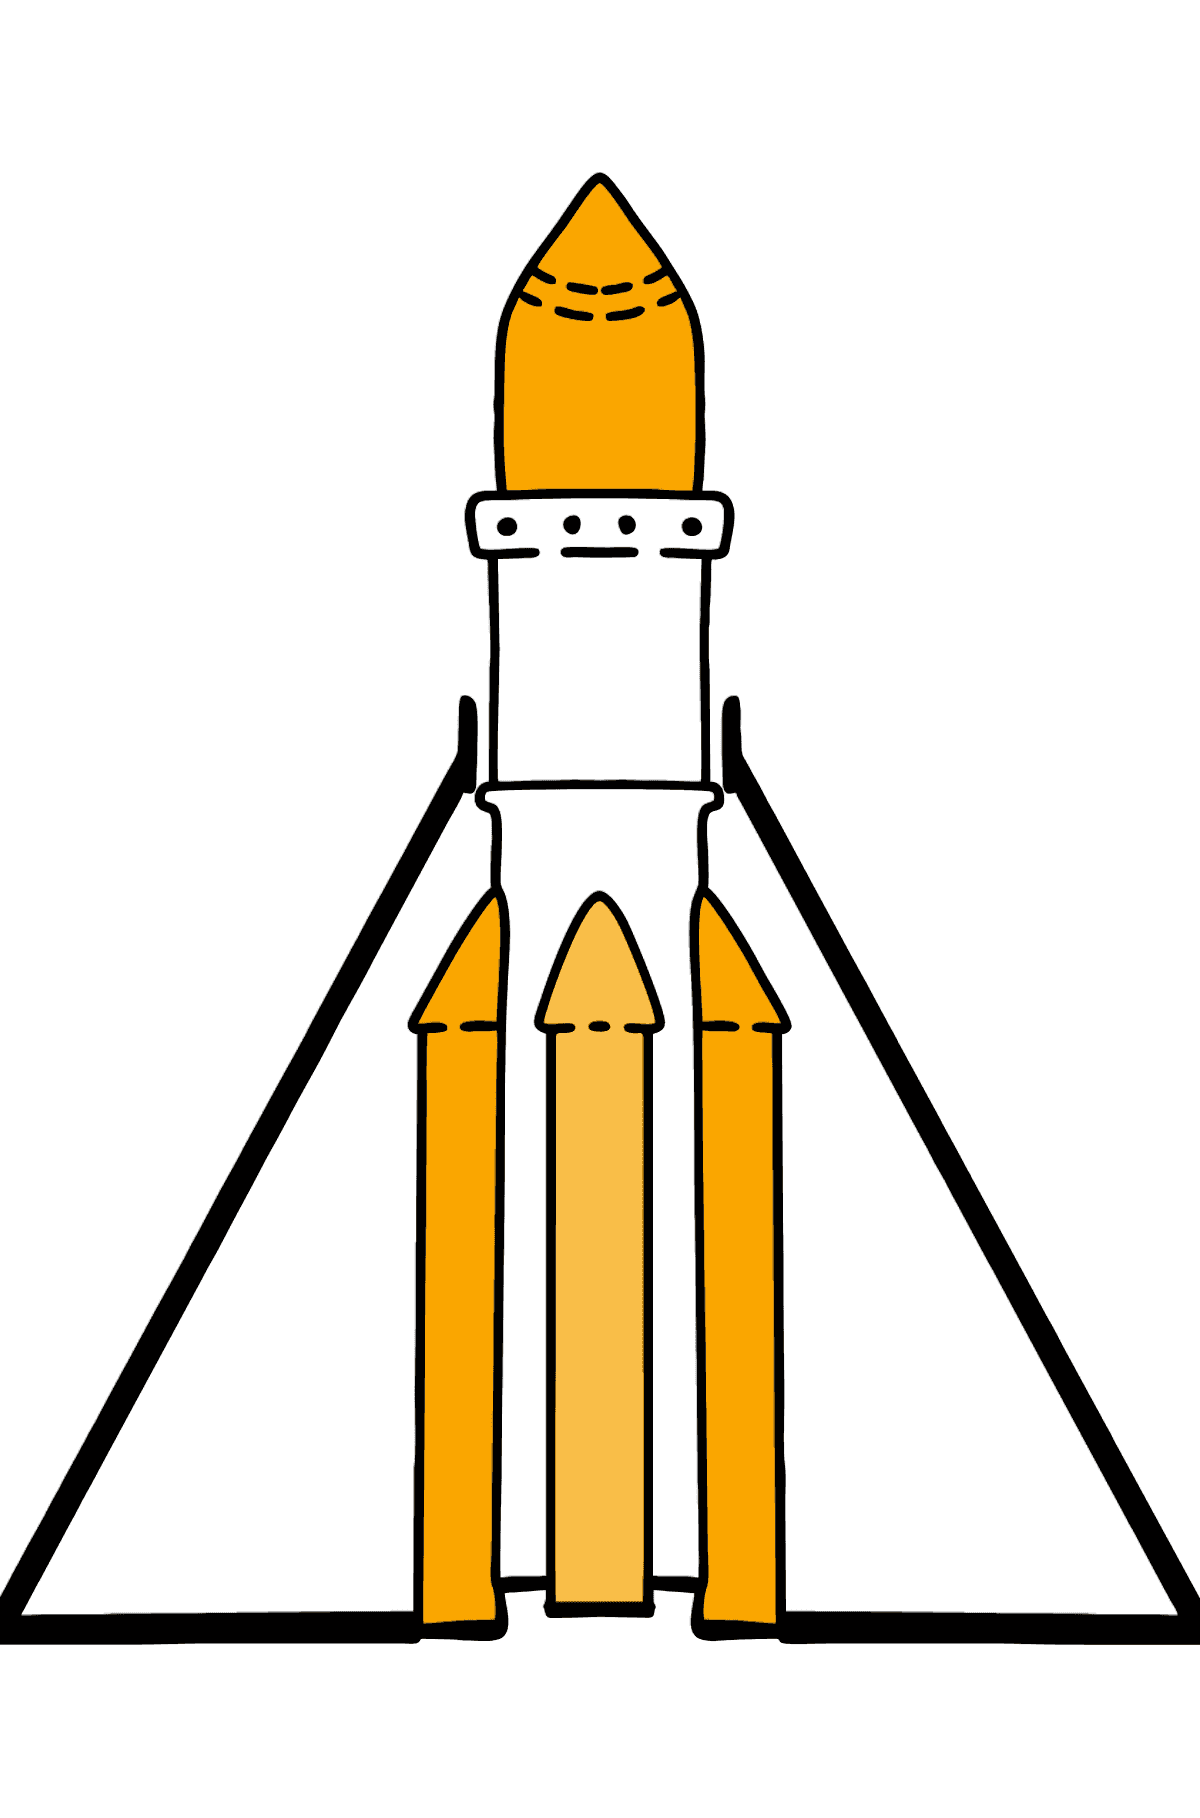 Rocket coloring page - Coloring Pages for Kids